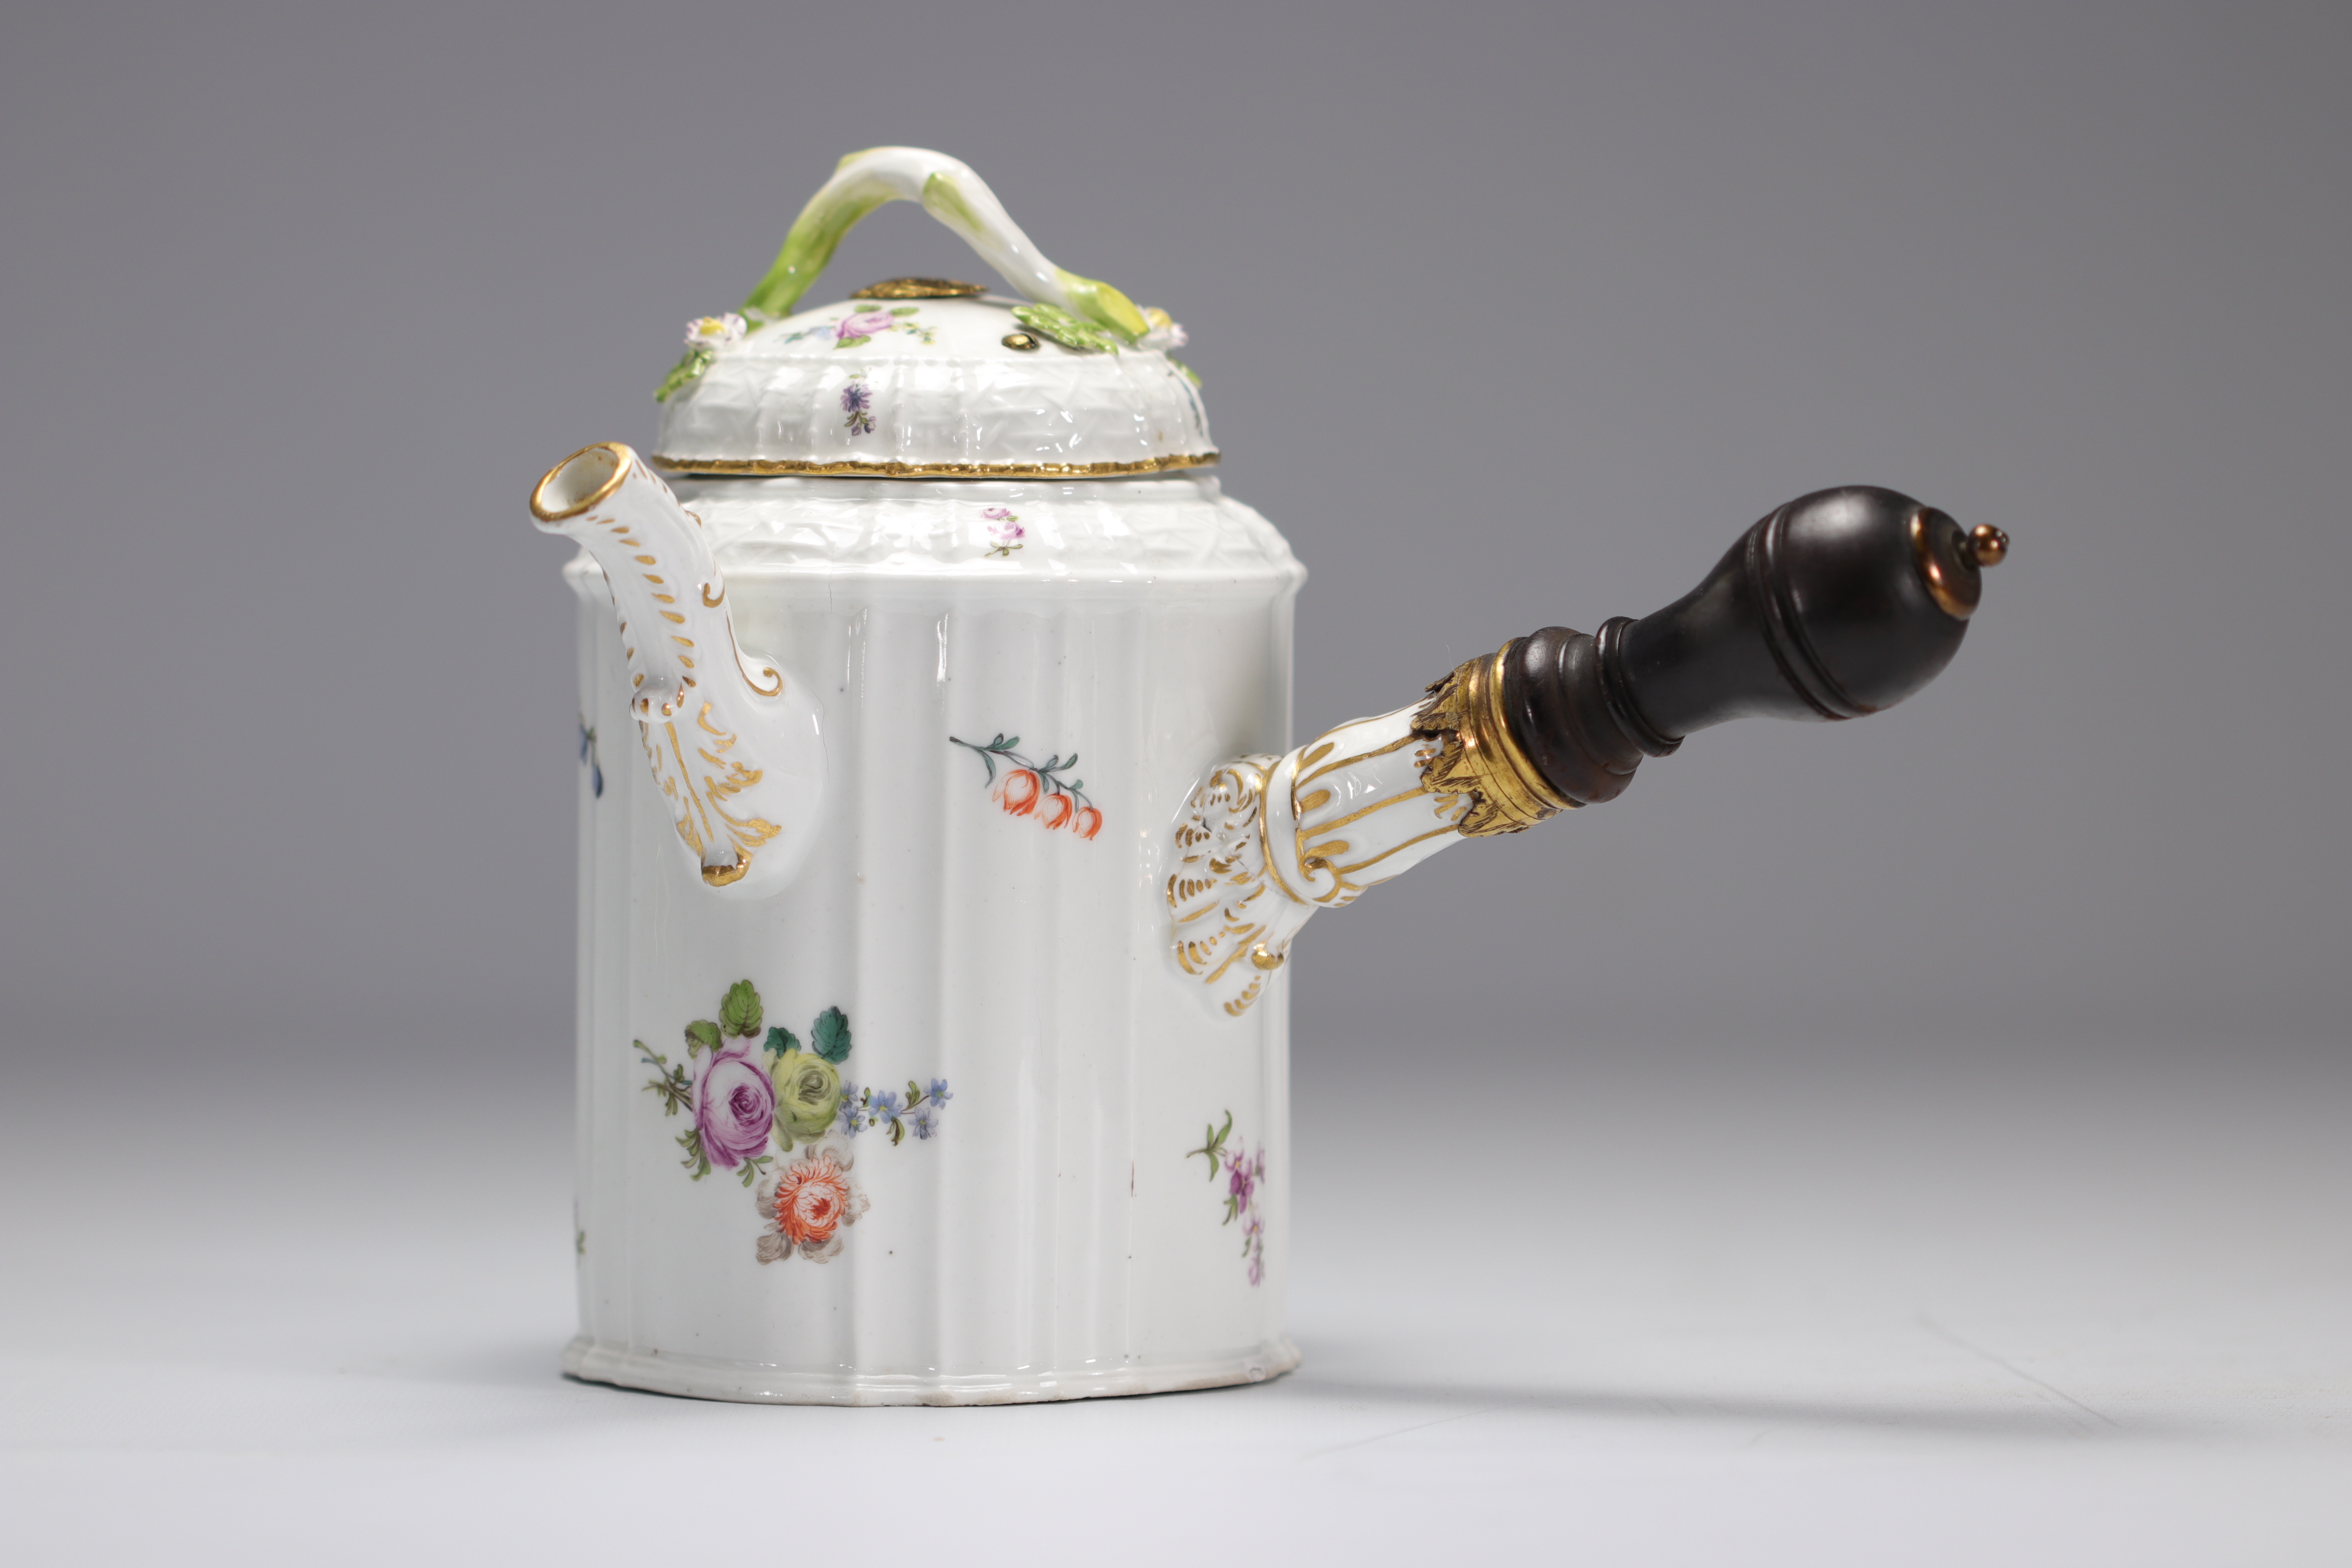 Porcelain chocolate pot from 18th century